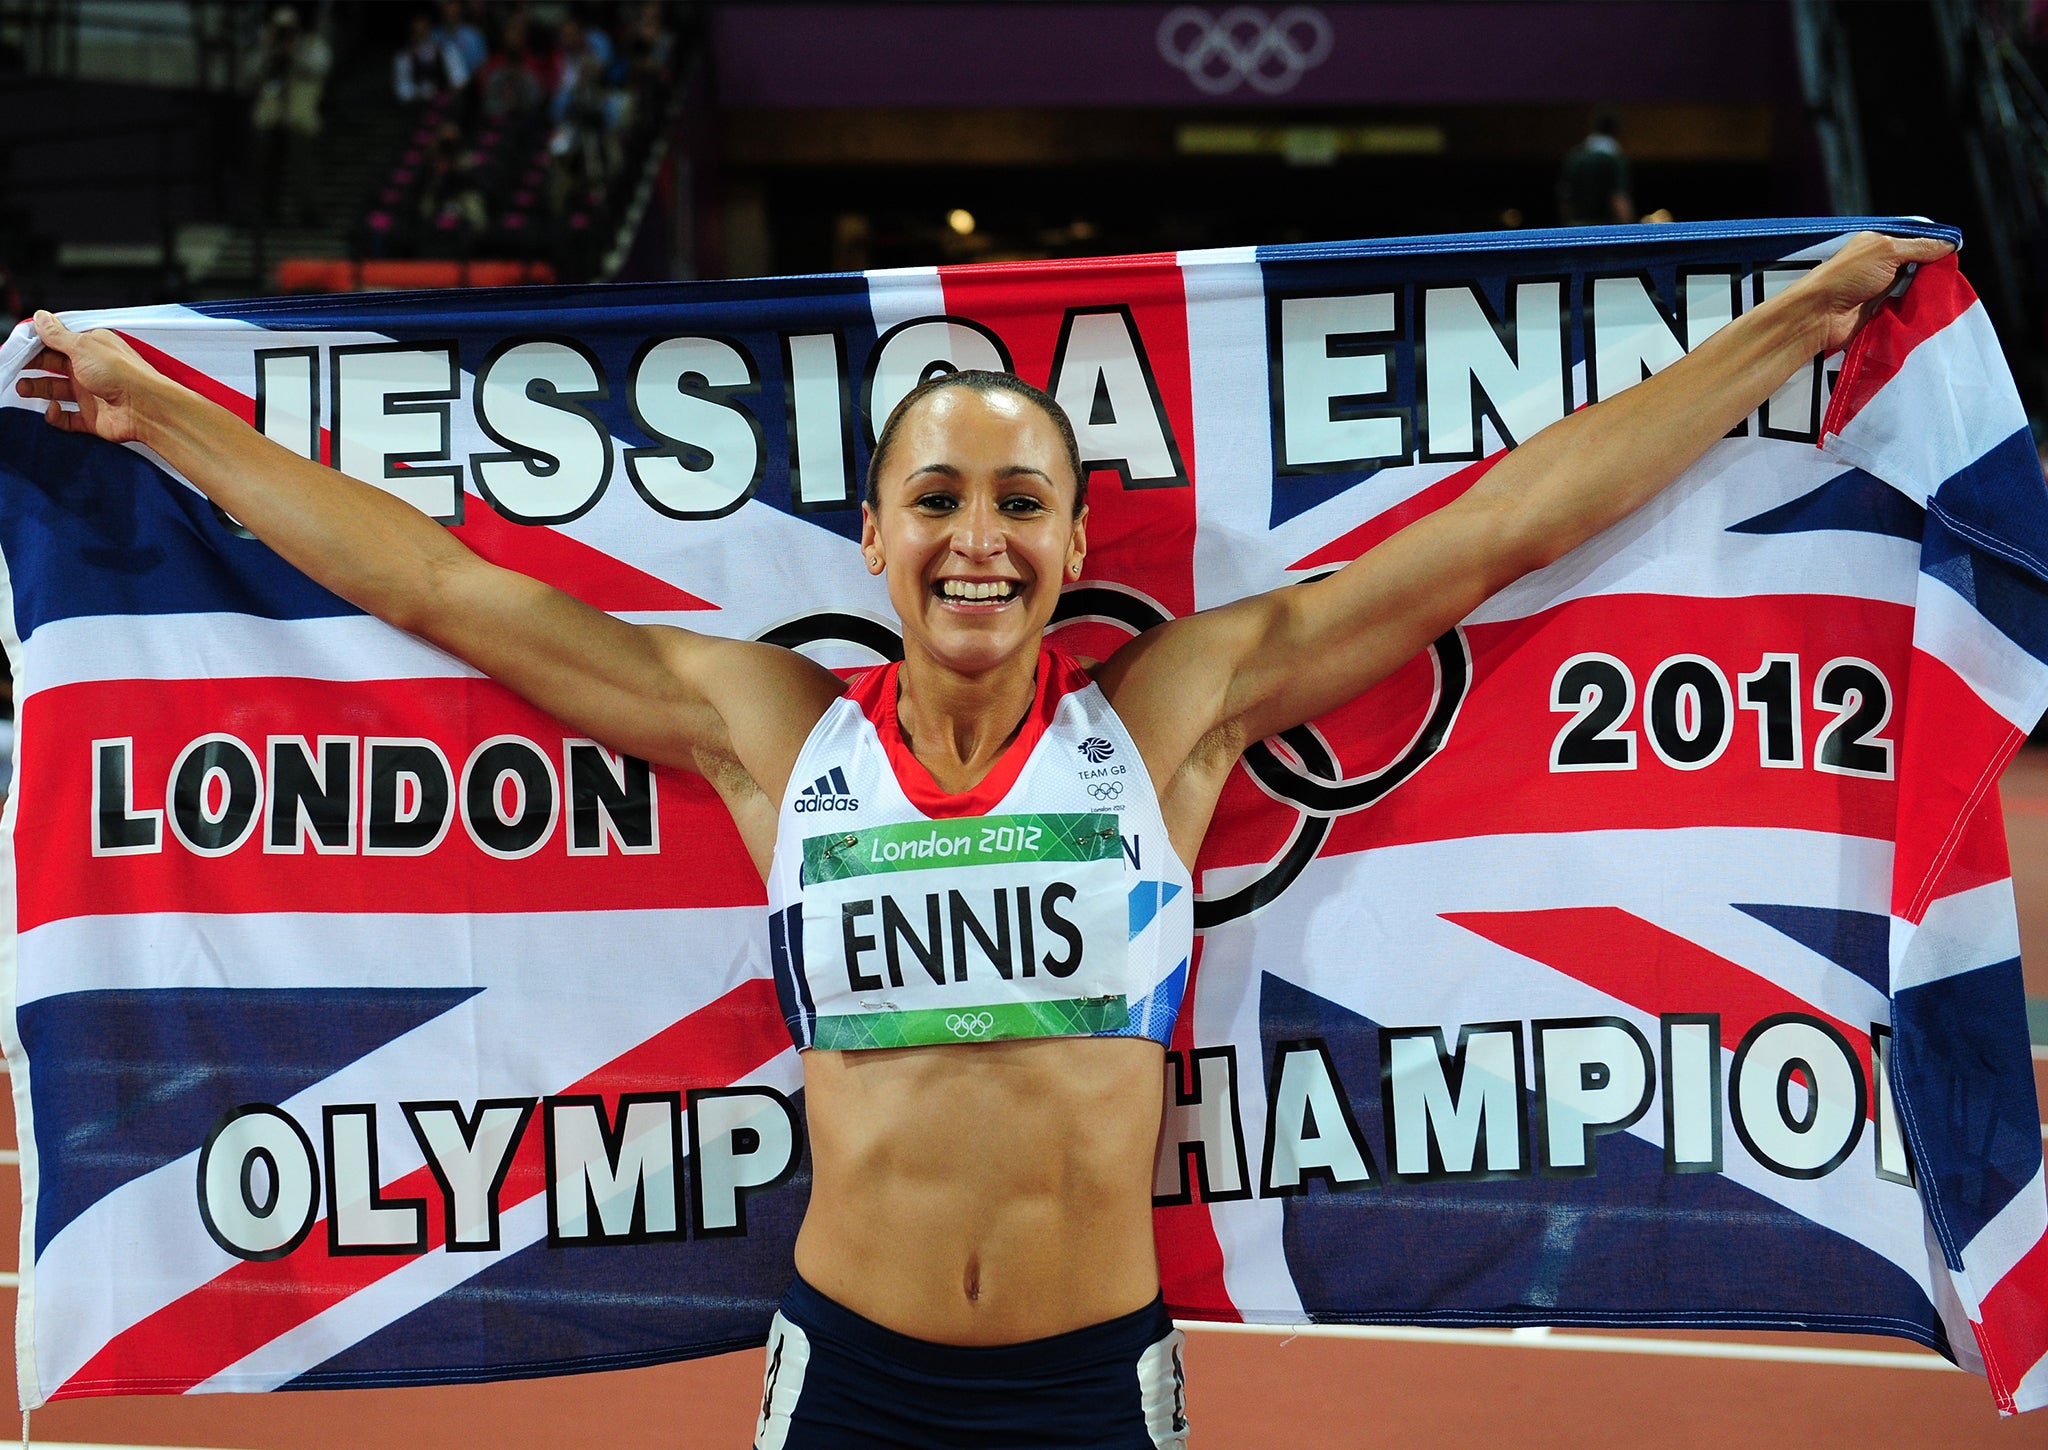 Jessica Ennis celebrates winning gold in the Women's Heptathlon on Day 8 of the London 2012 Olympic Games